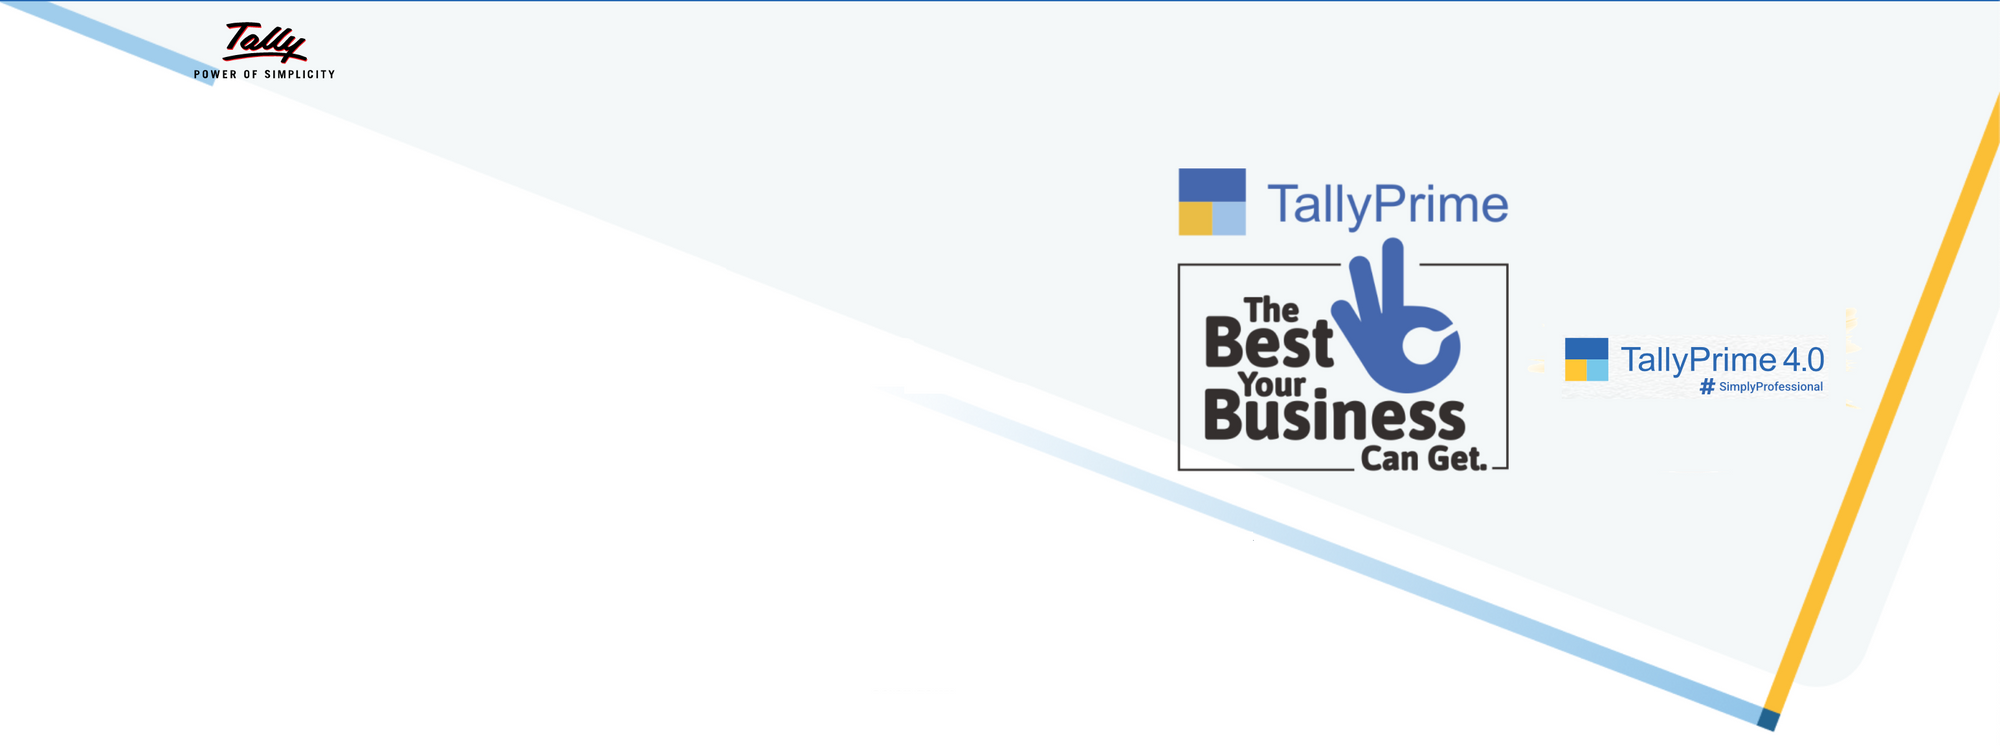 TallyPrime 4.0 | Tally Solutions